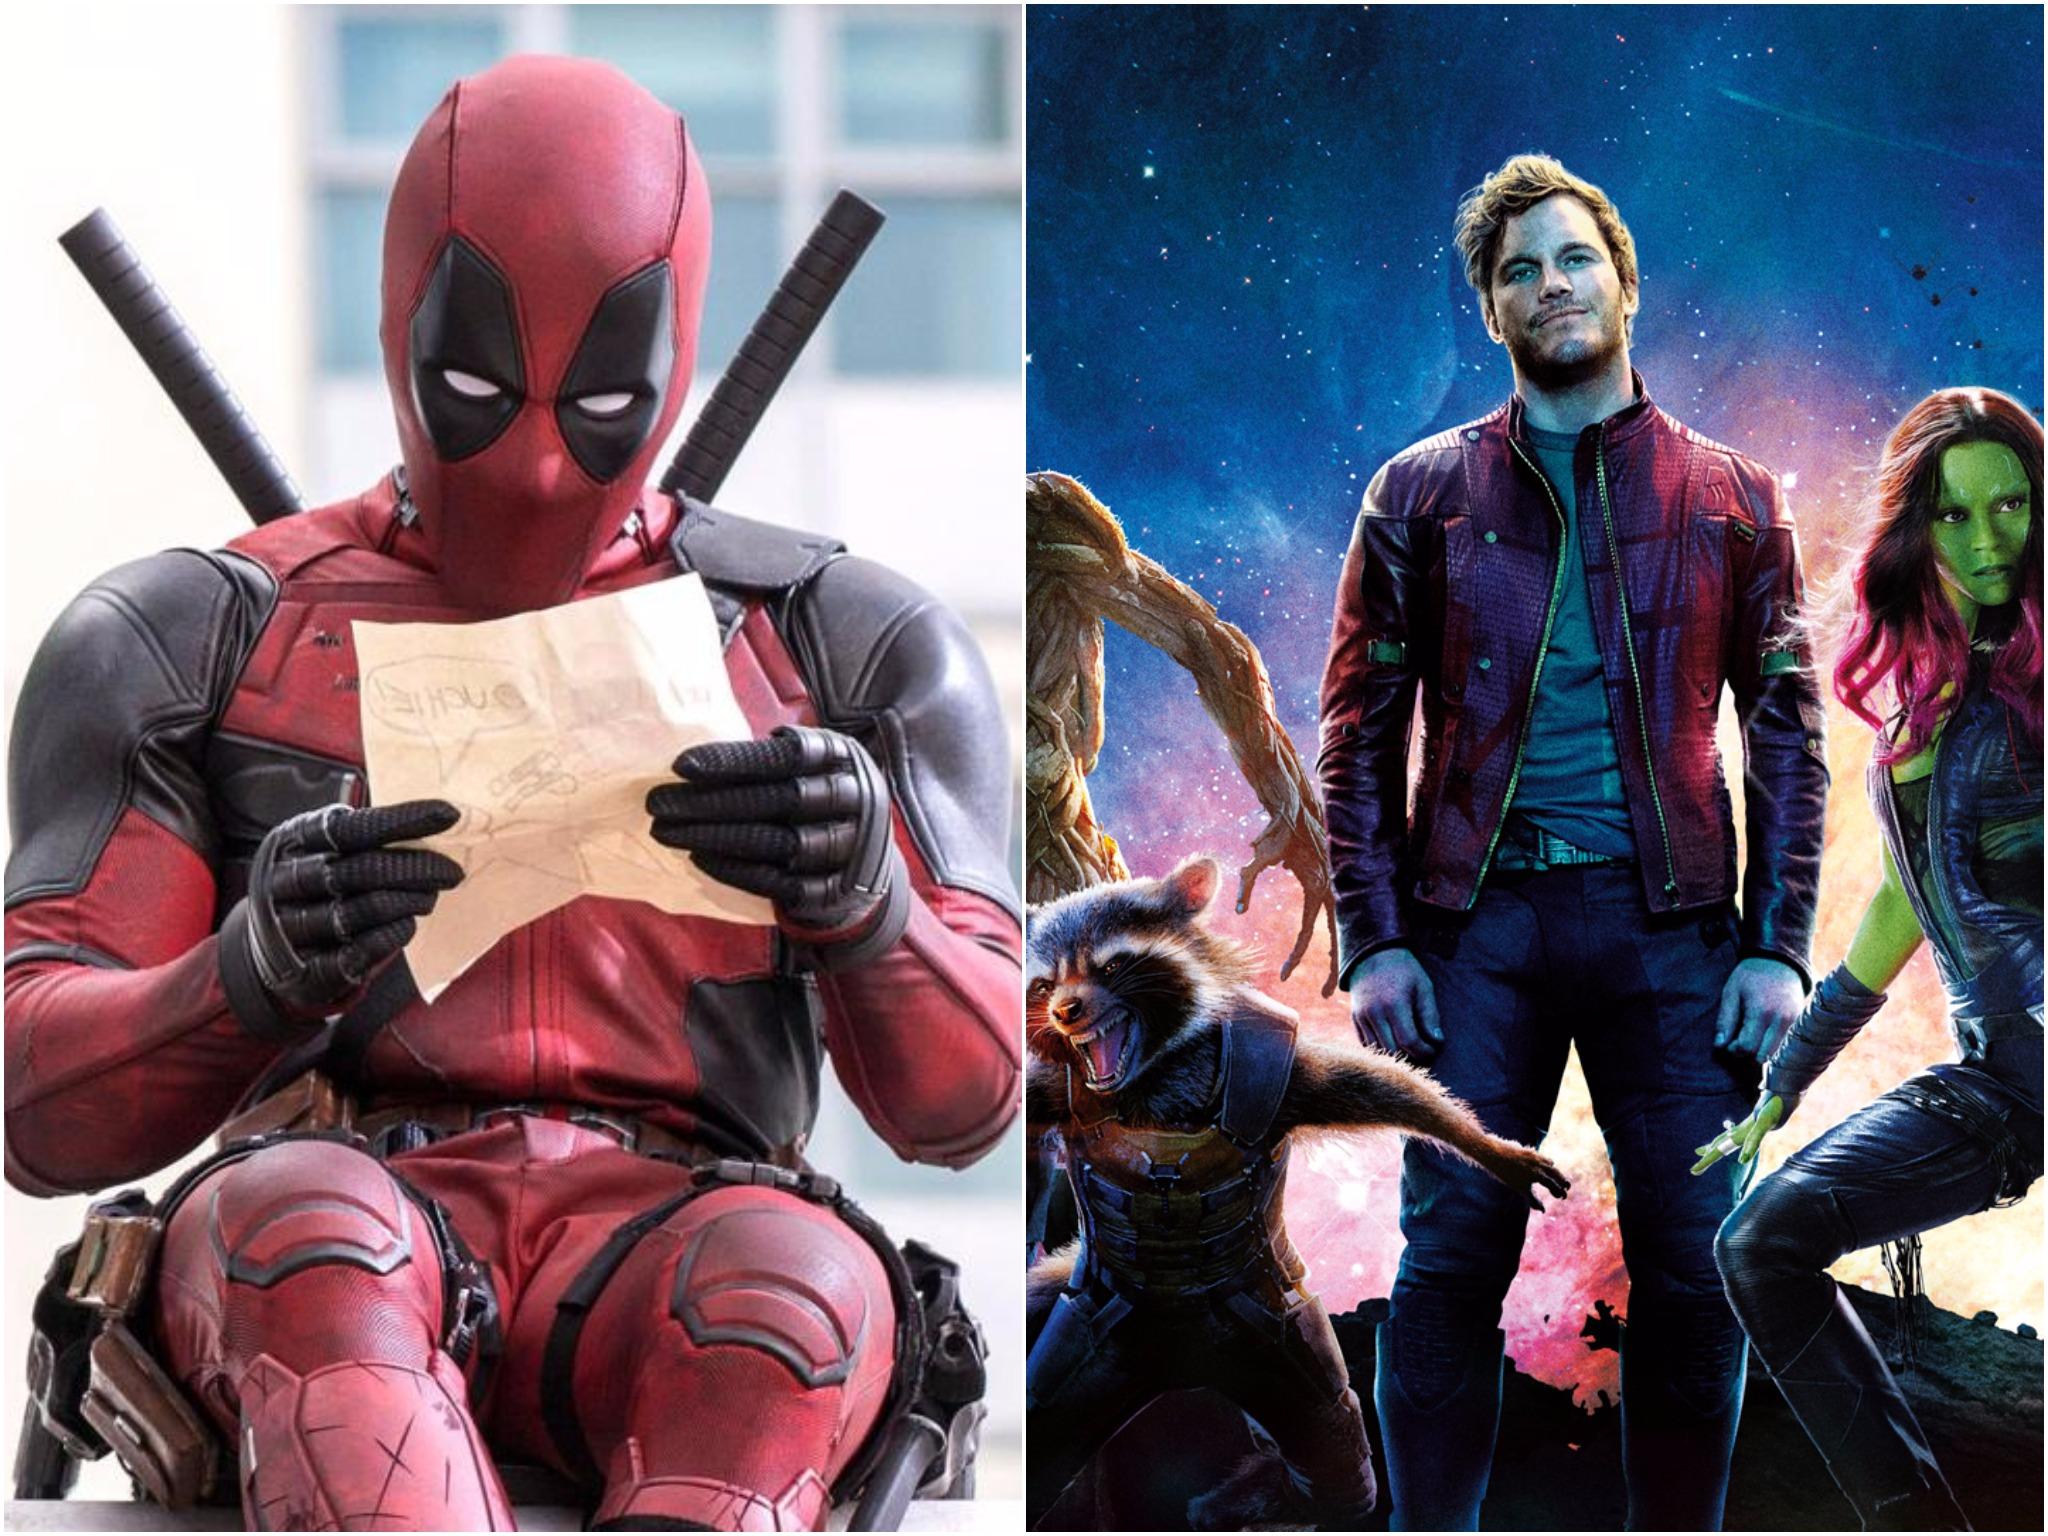 Deadpool And Guardians Of The Galaxy Vol 2 Share A Very